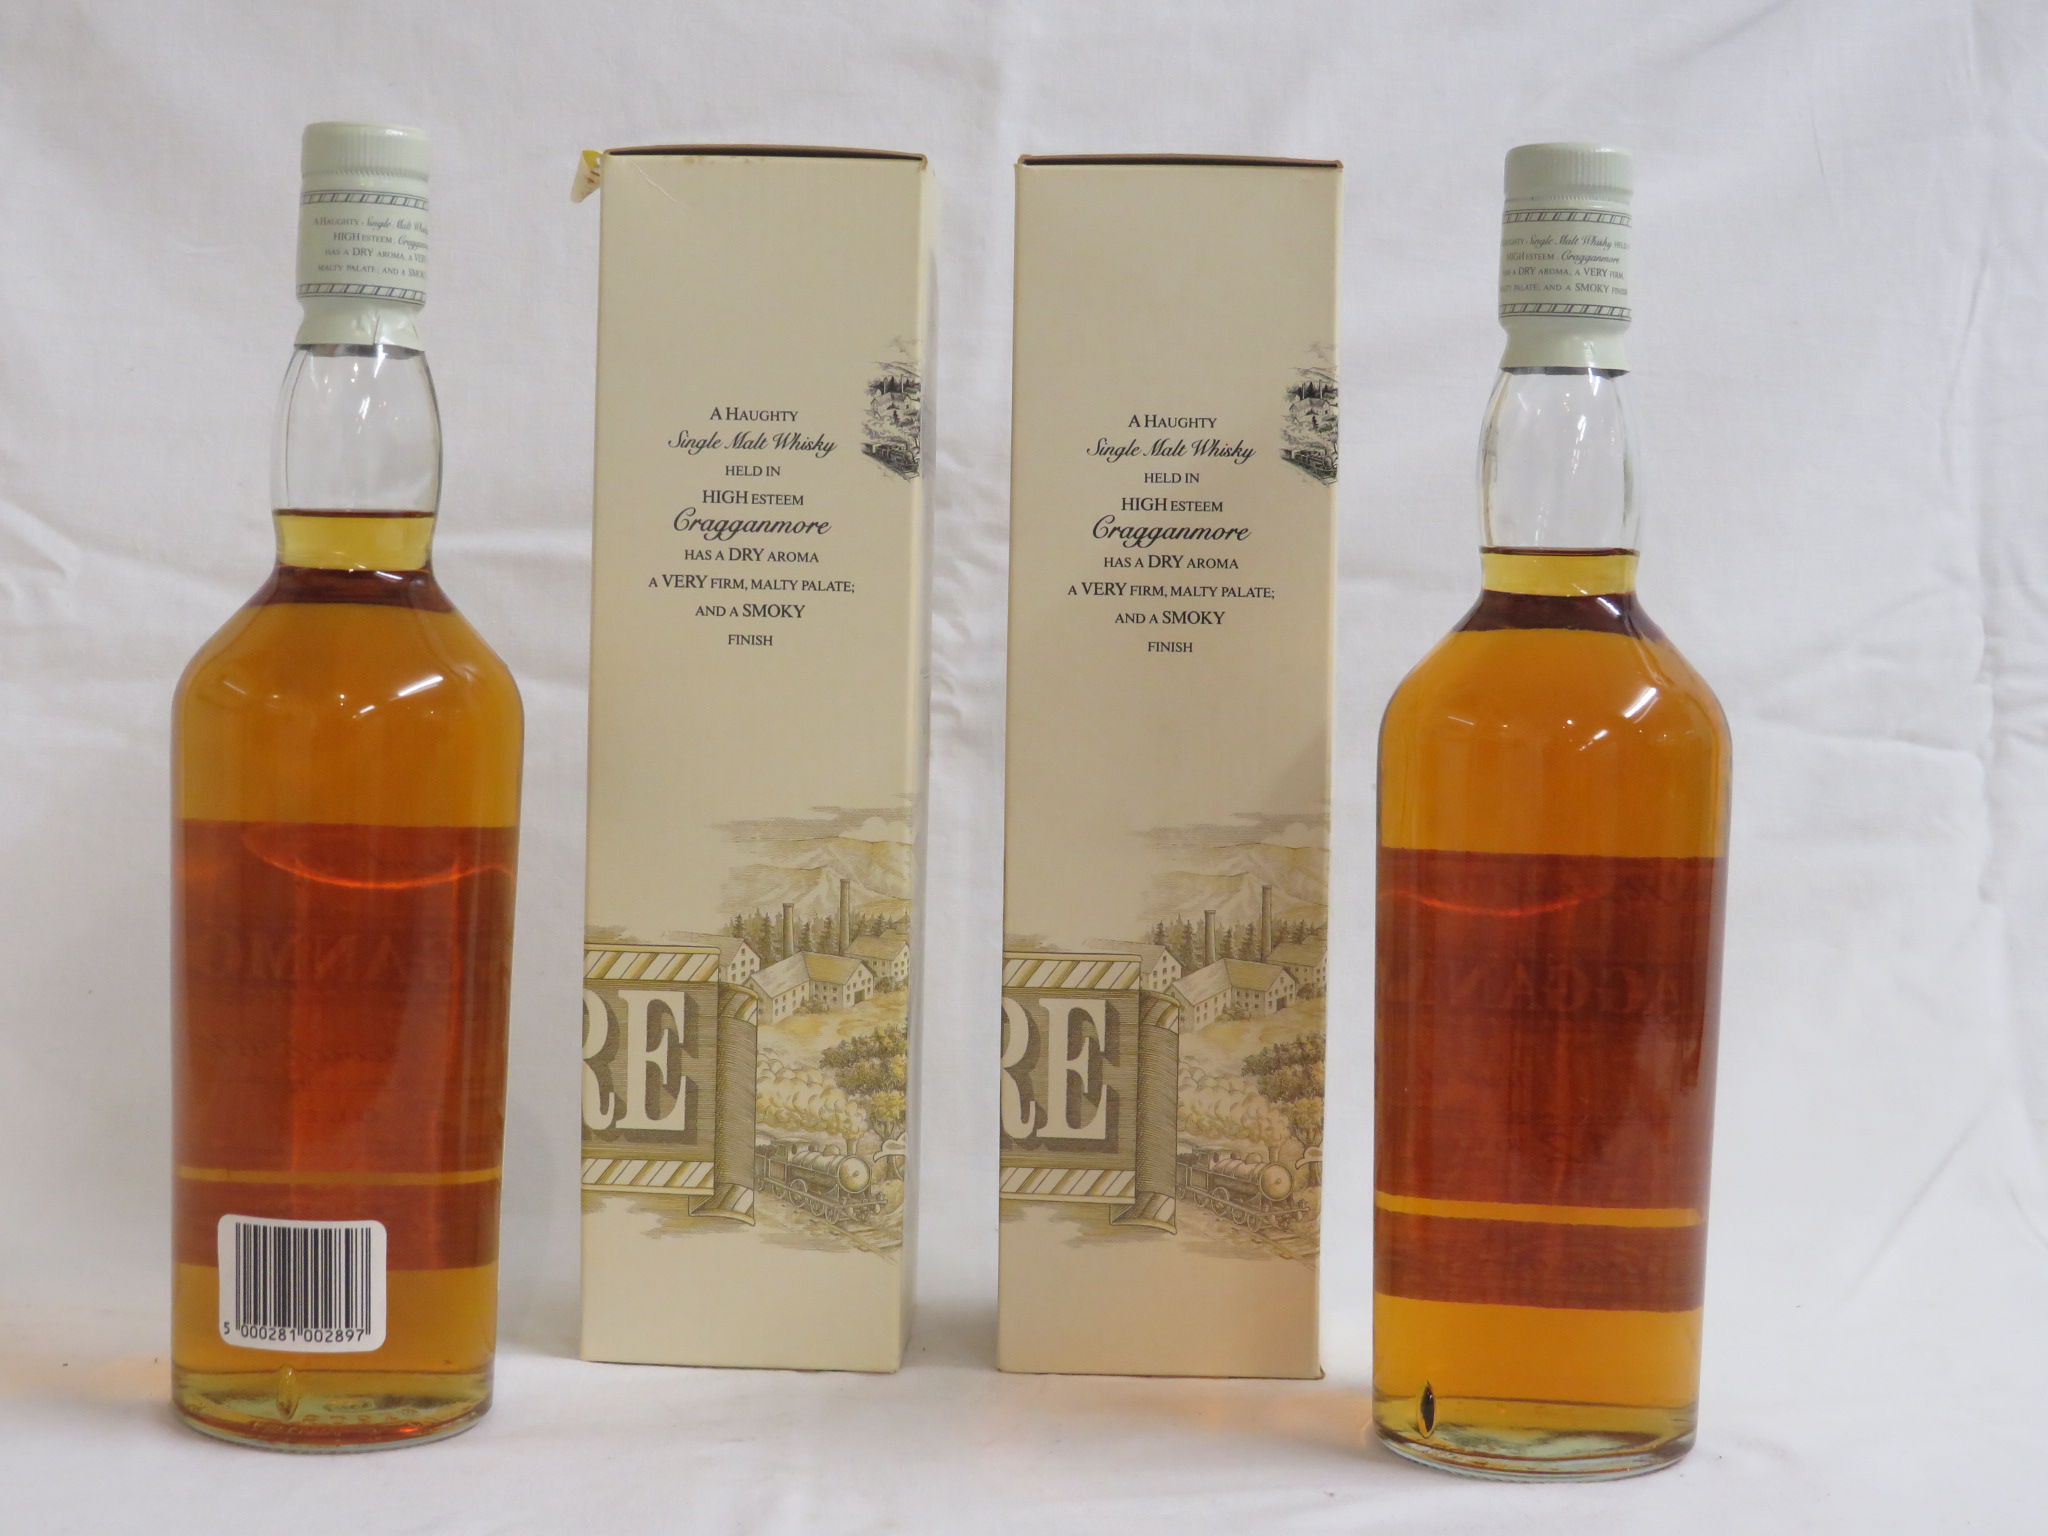 Two boxed bottles of Cragganmore single Highland malt Scotch whisky, 12 years old, 75cl - Image 2 of 4